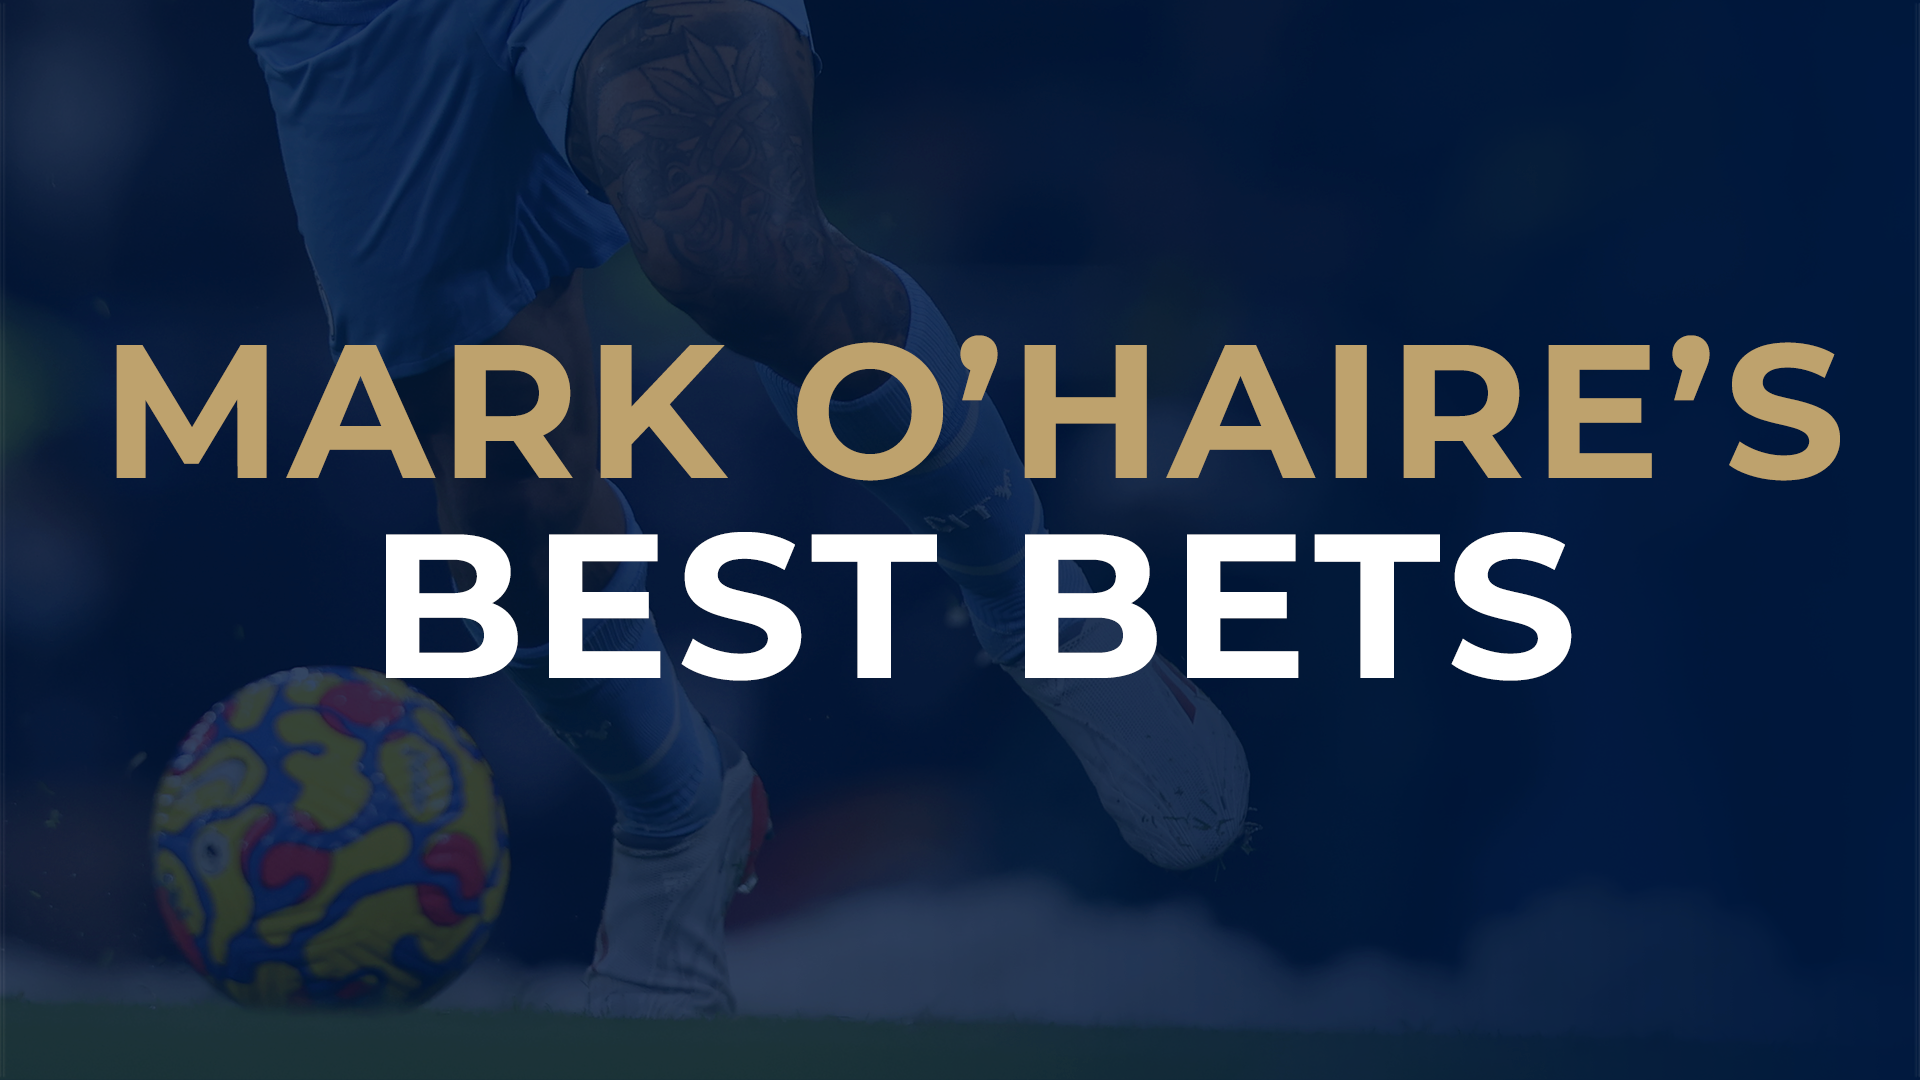 football betting tips saturday in the park